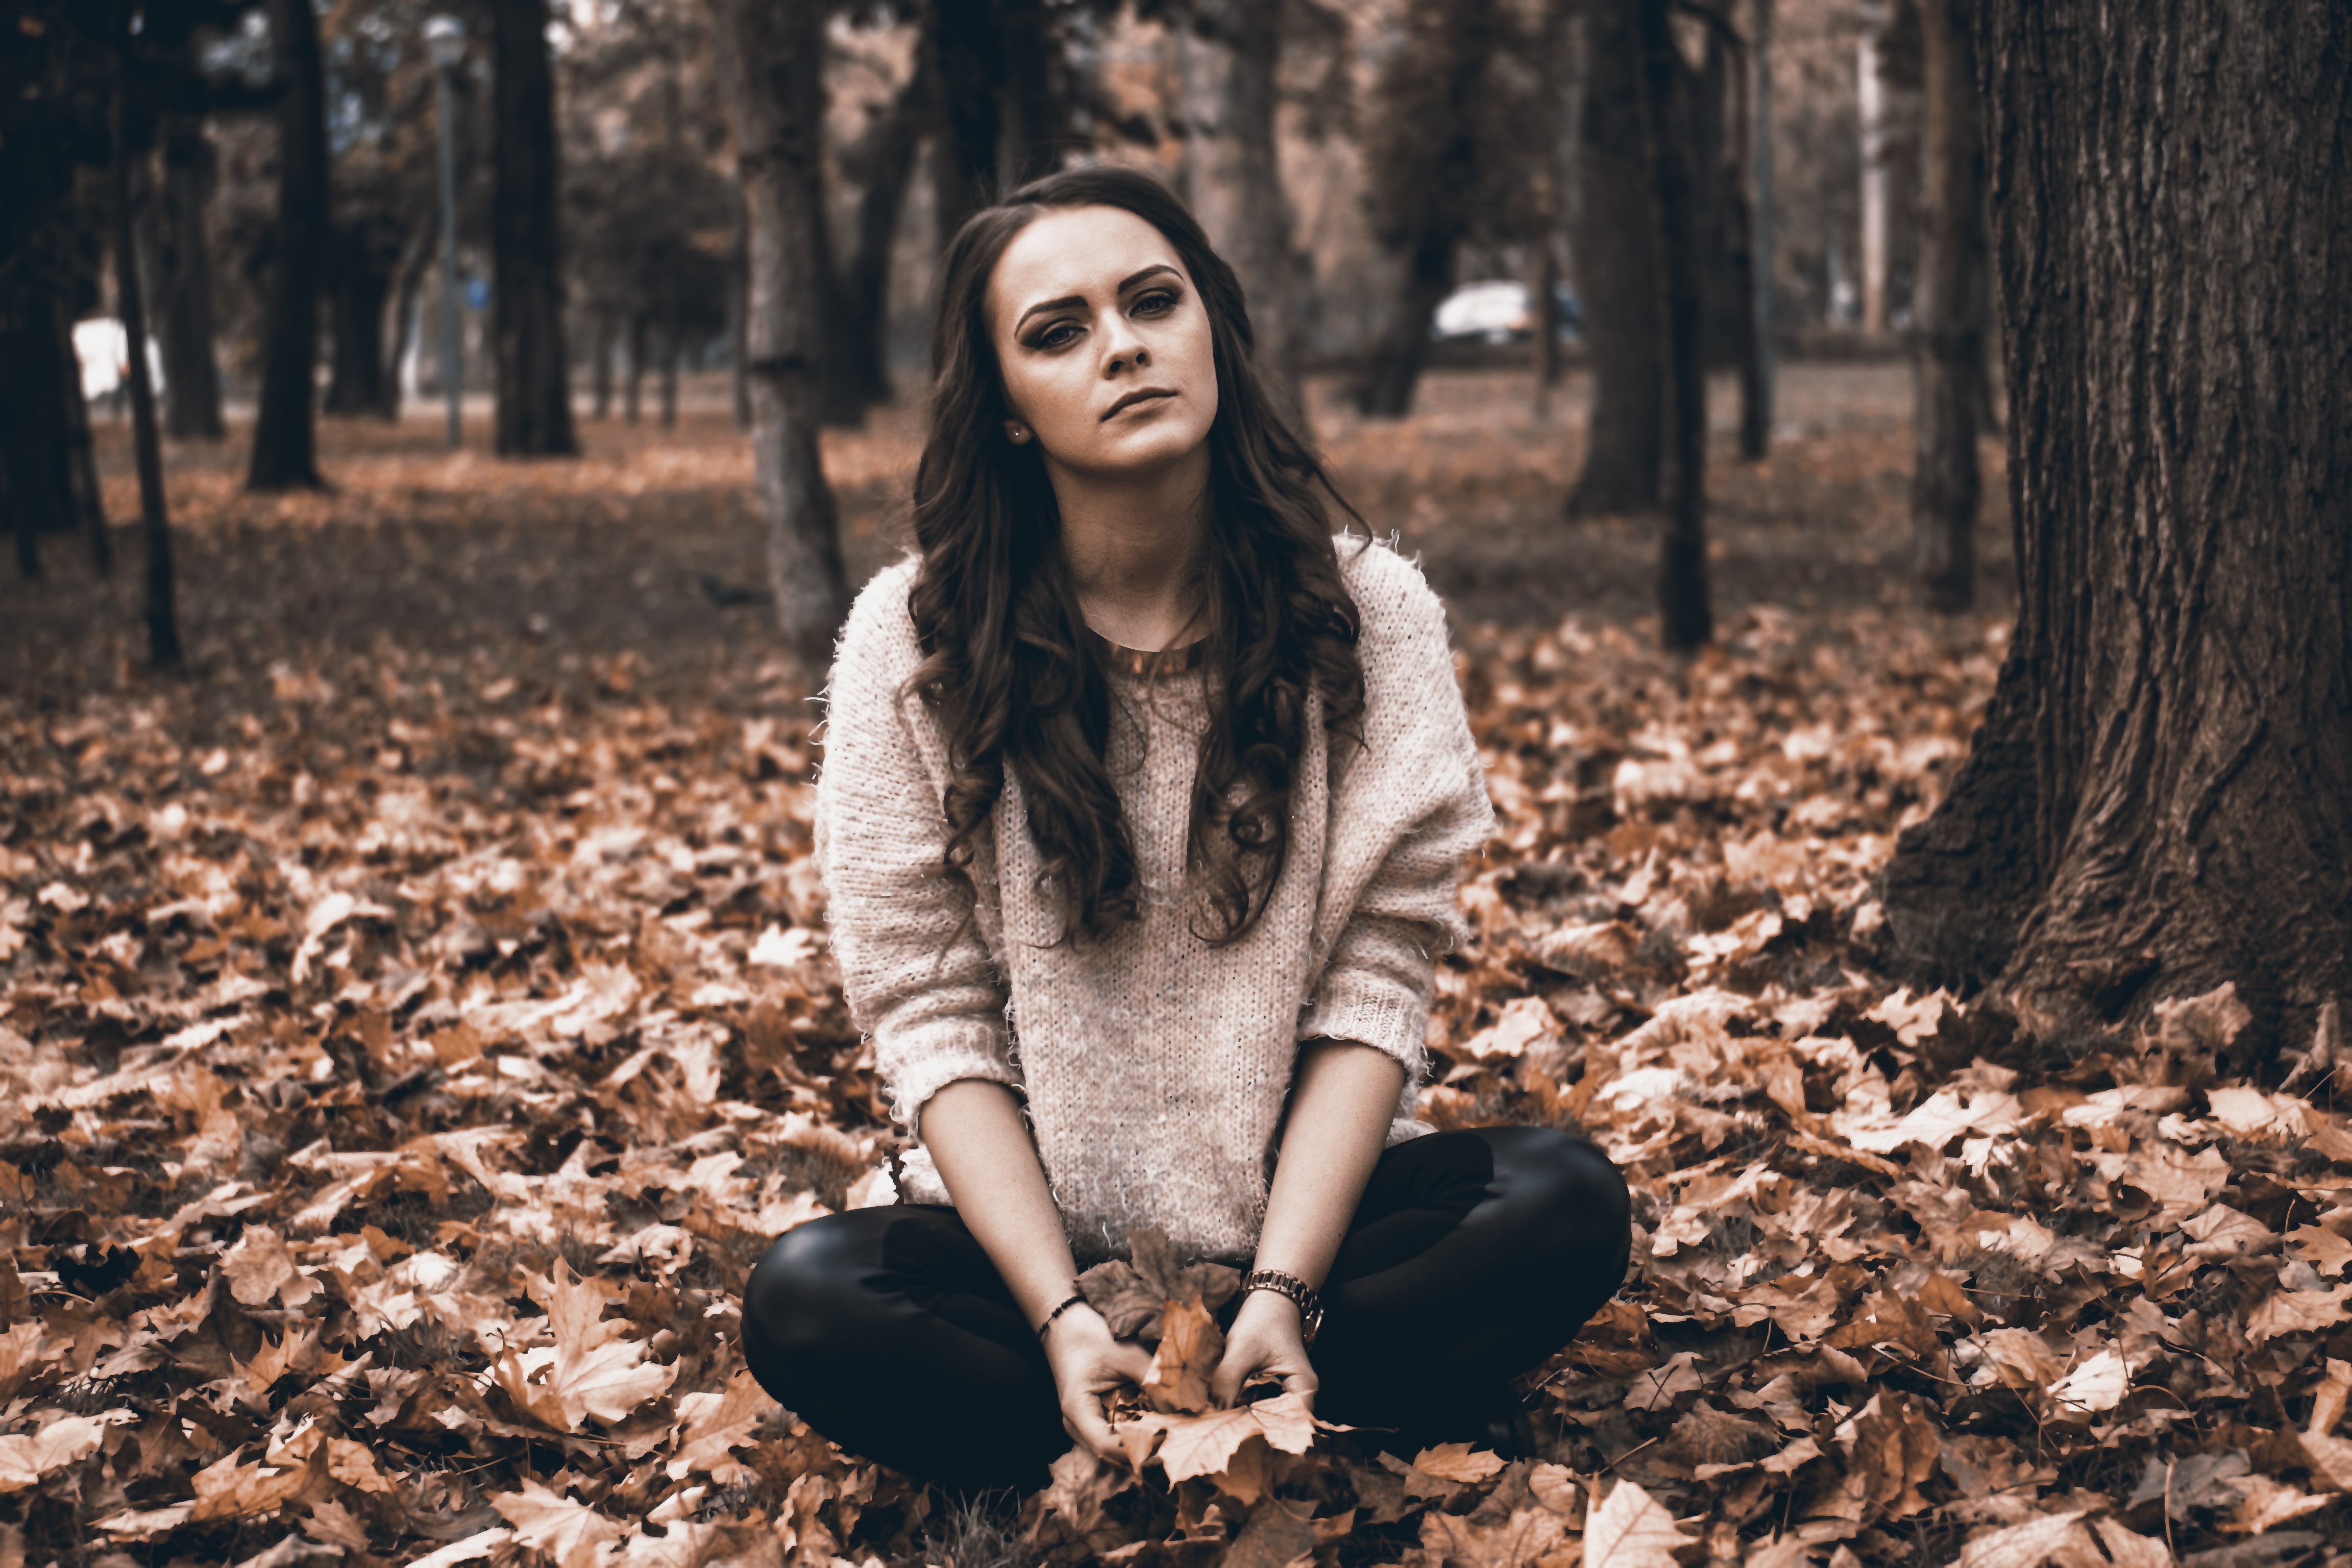 A woman sitting in the forest | Source: Pexels